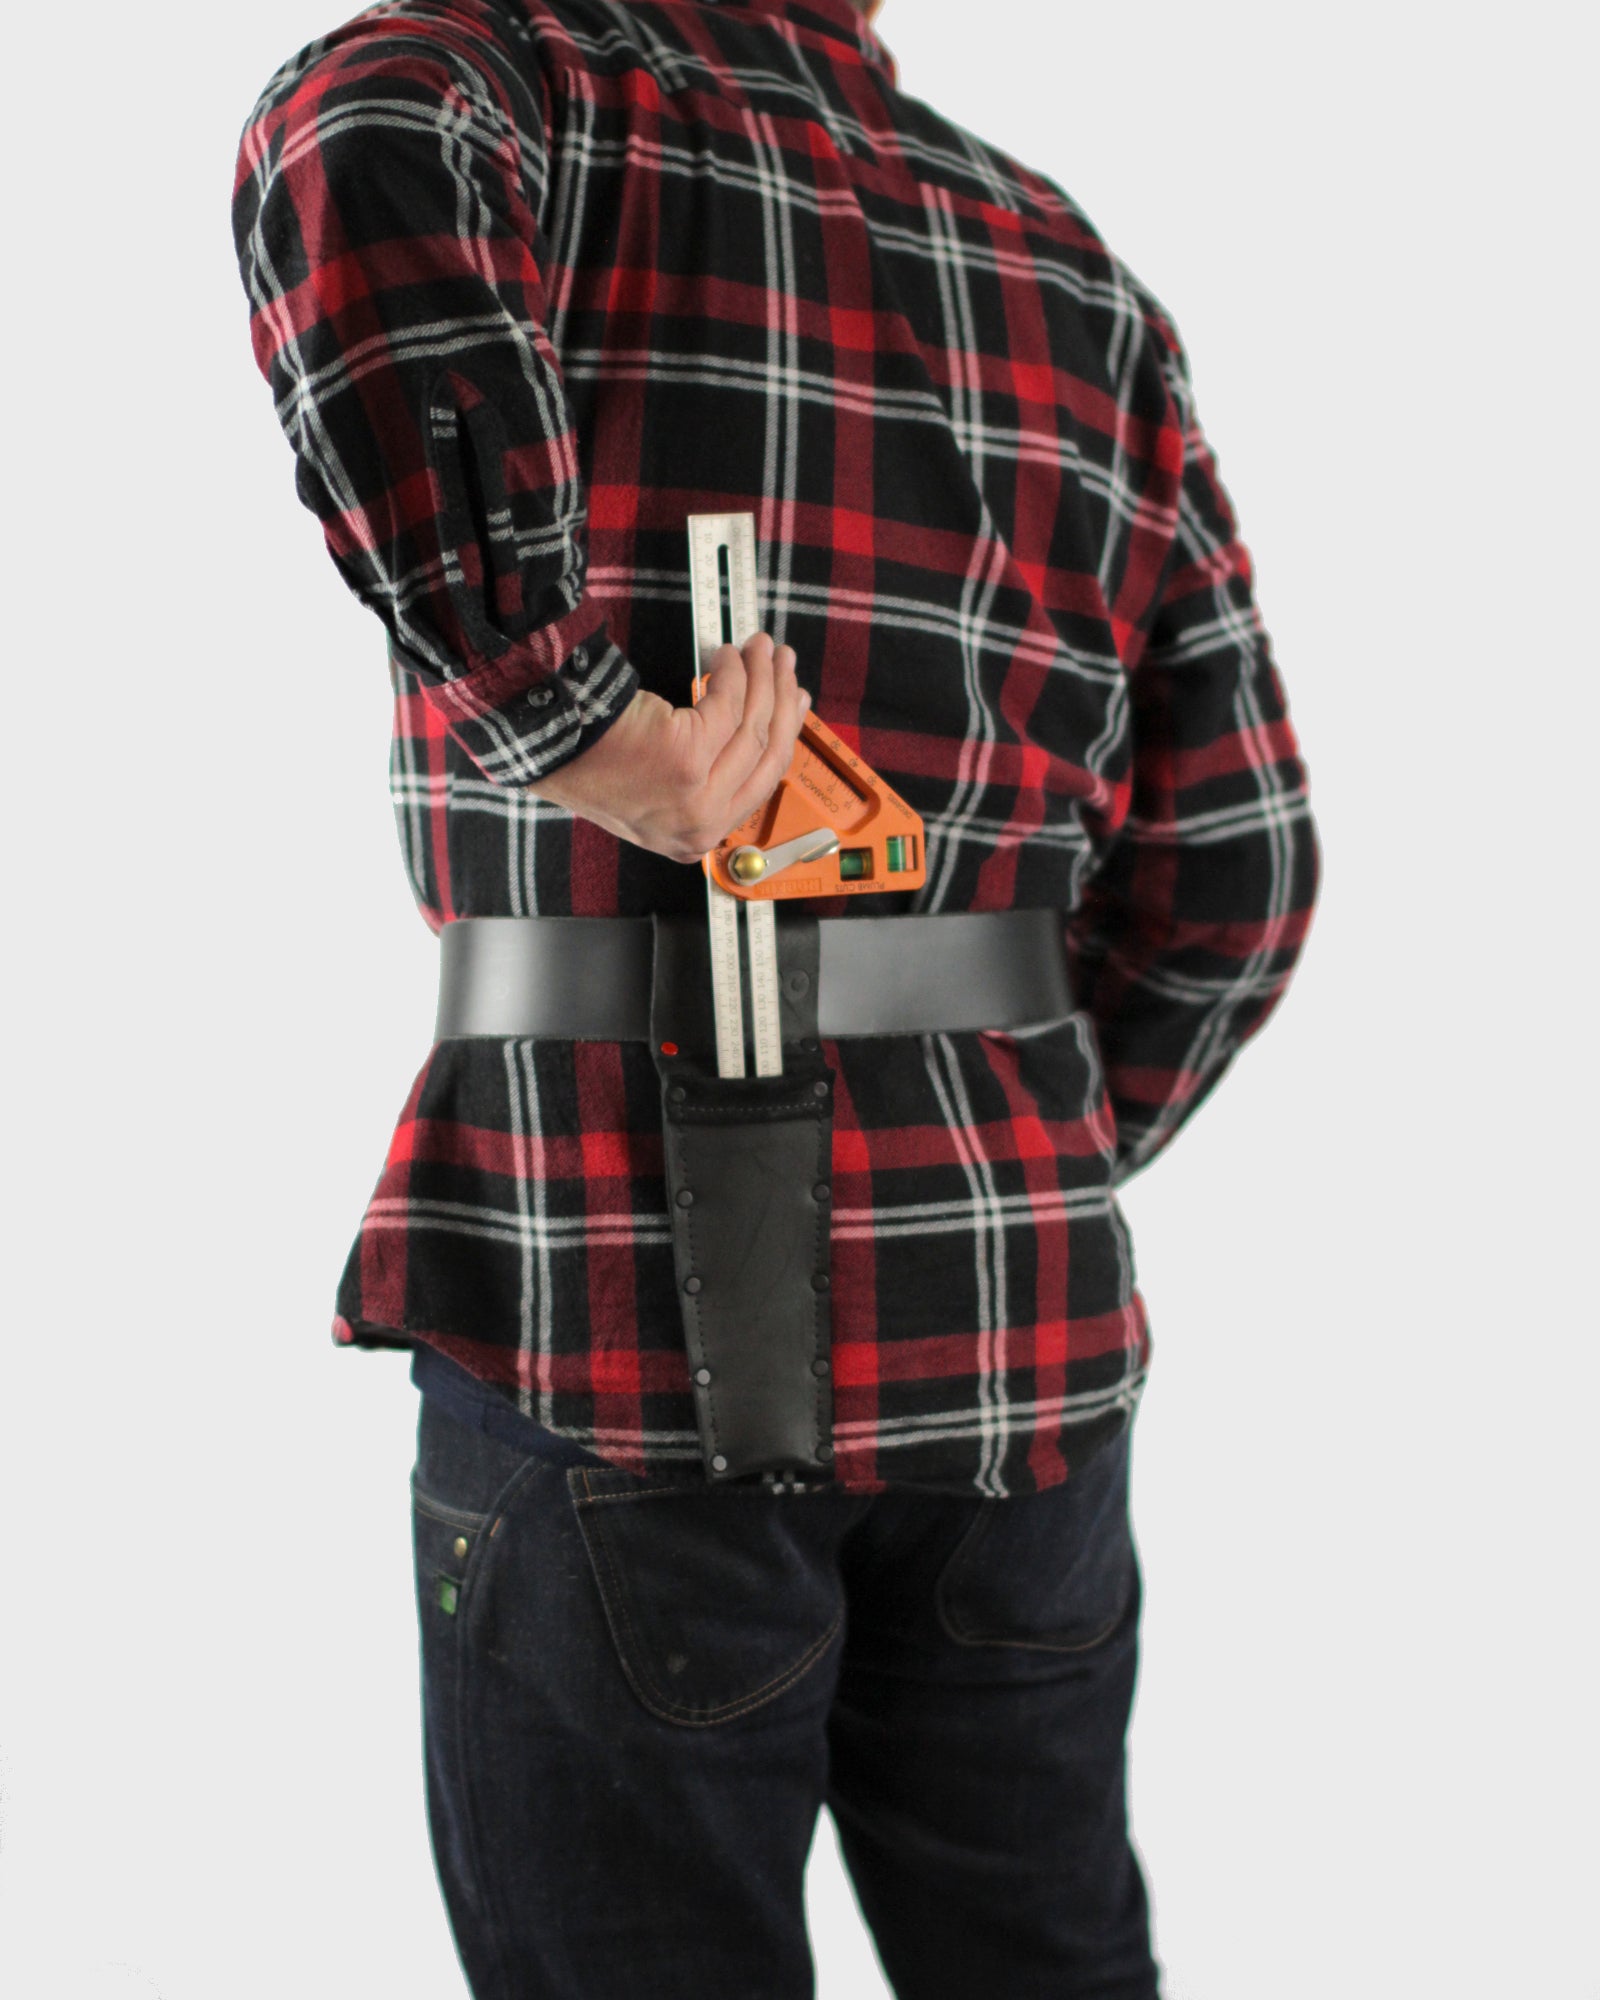 Combination Square Holster